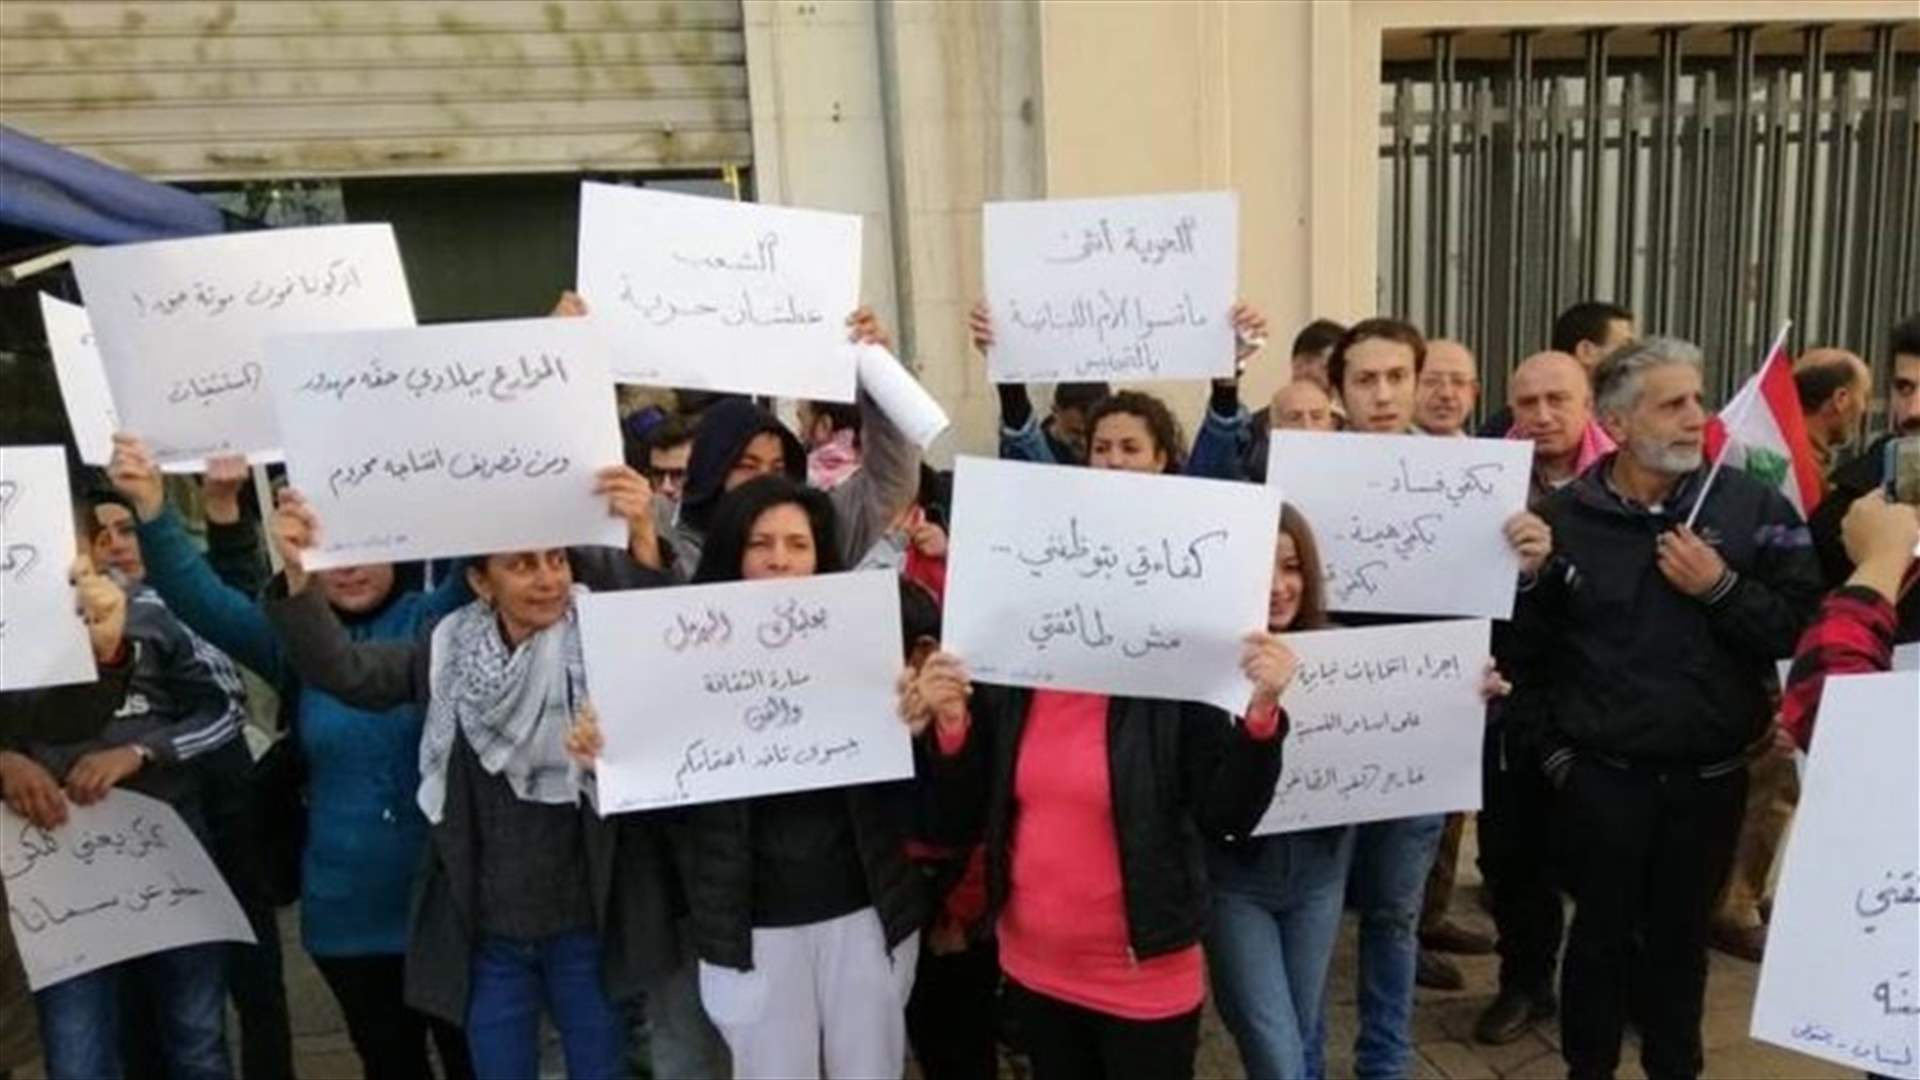 Baalbek residents continue their movement